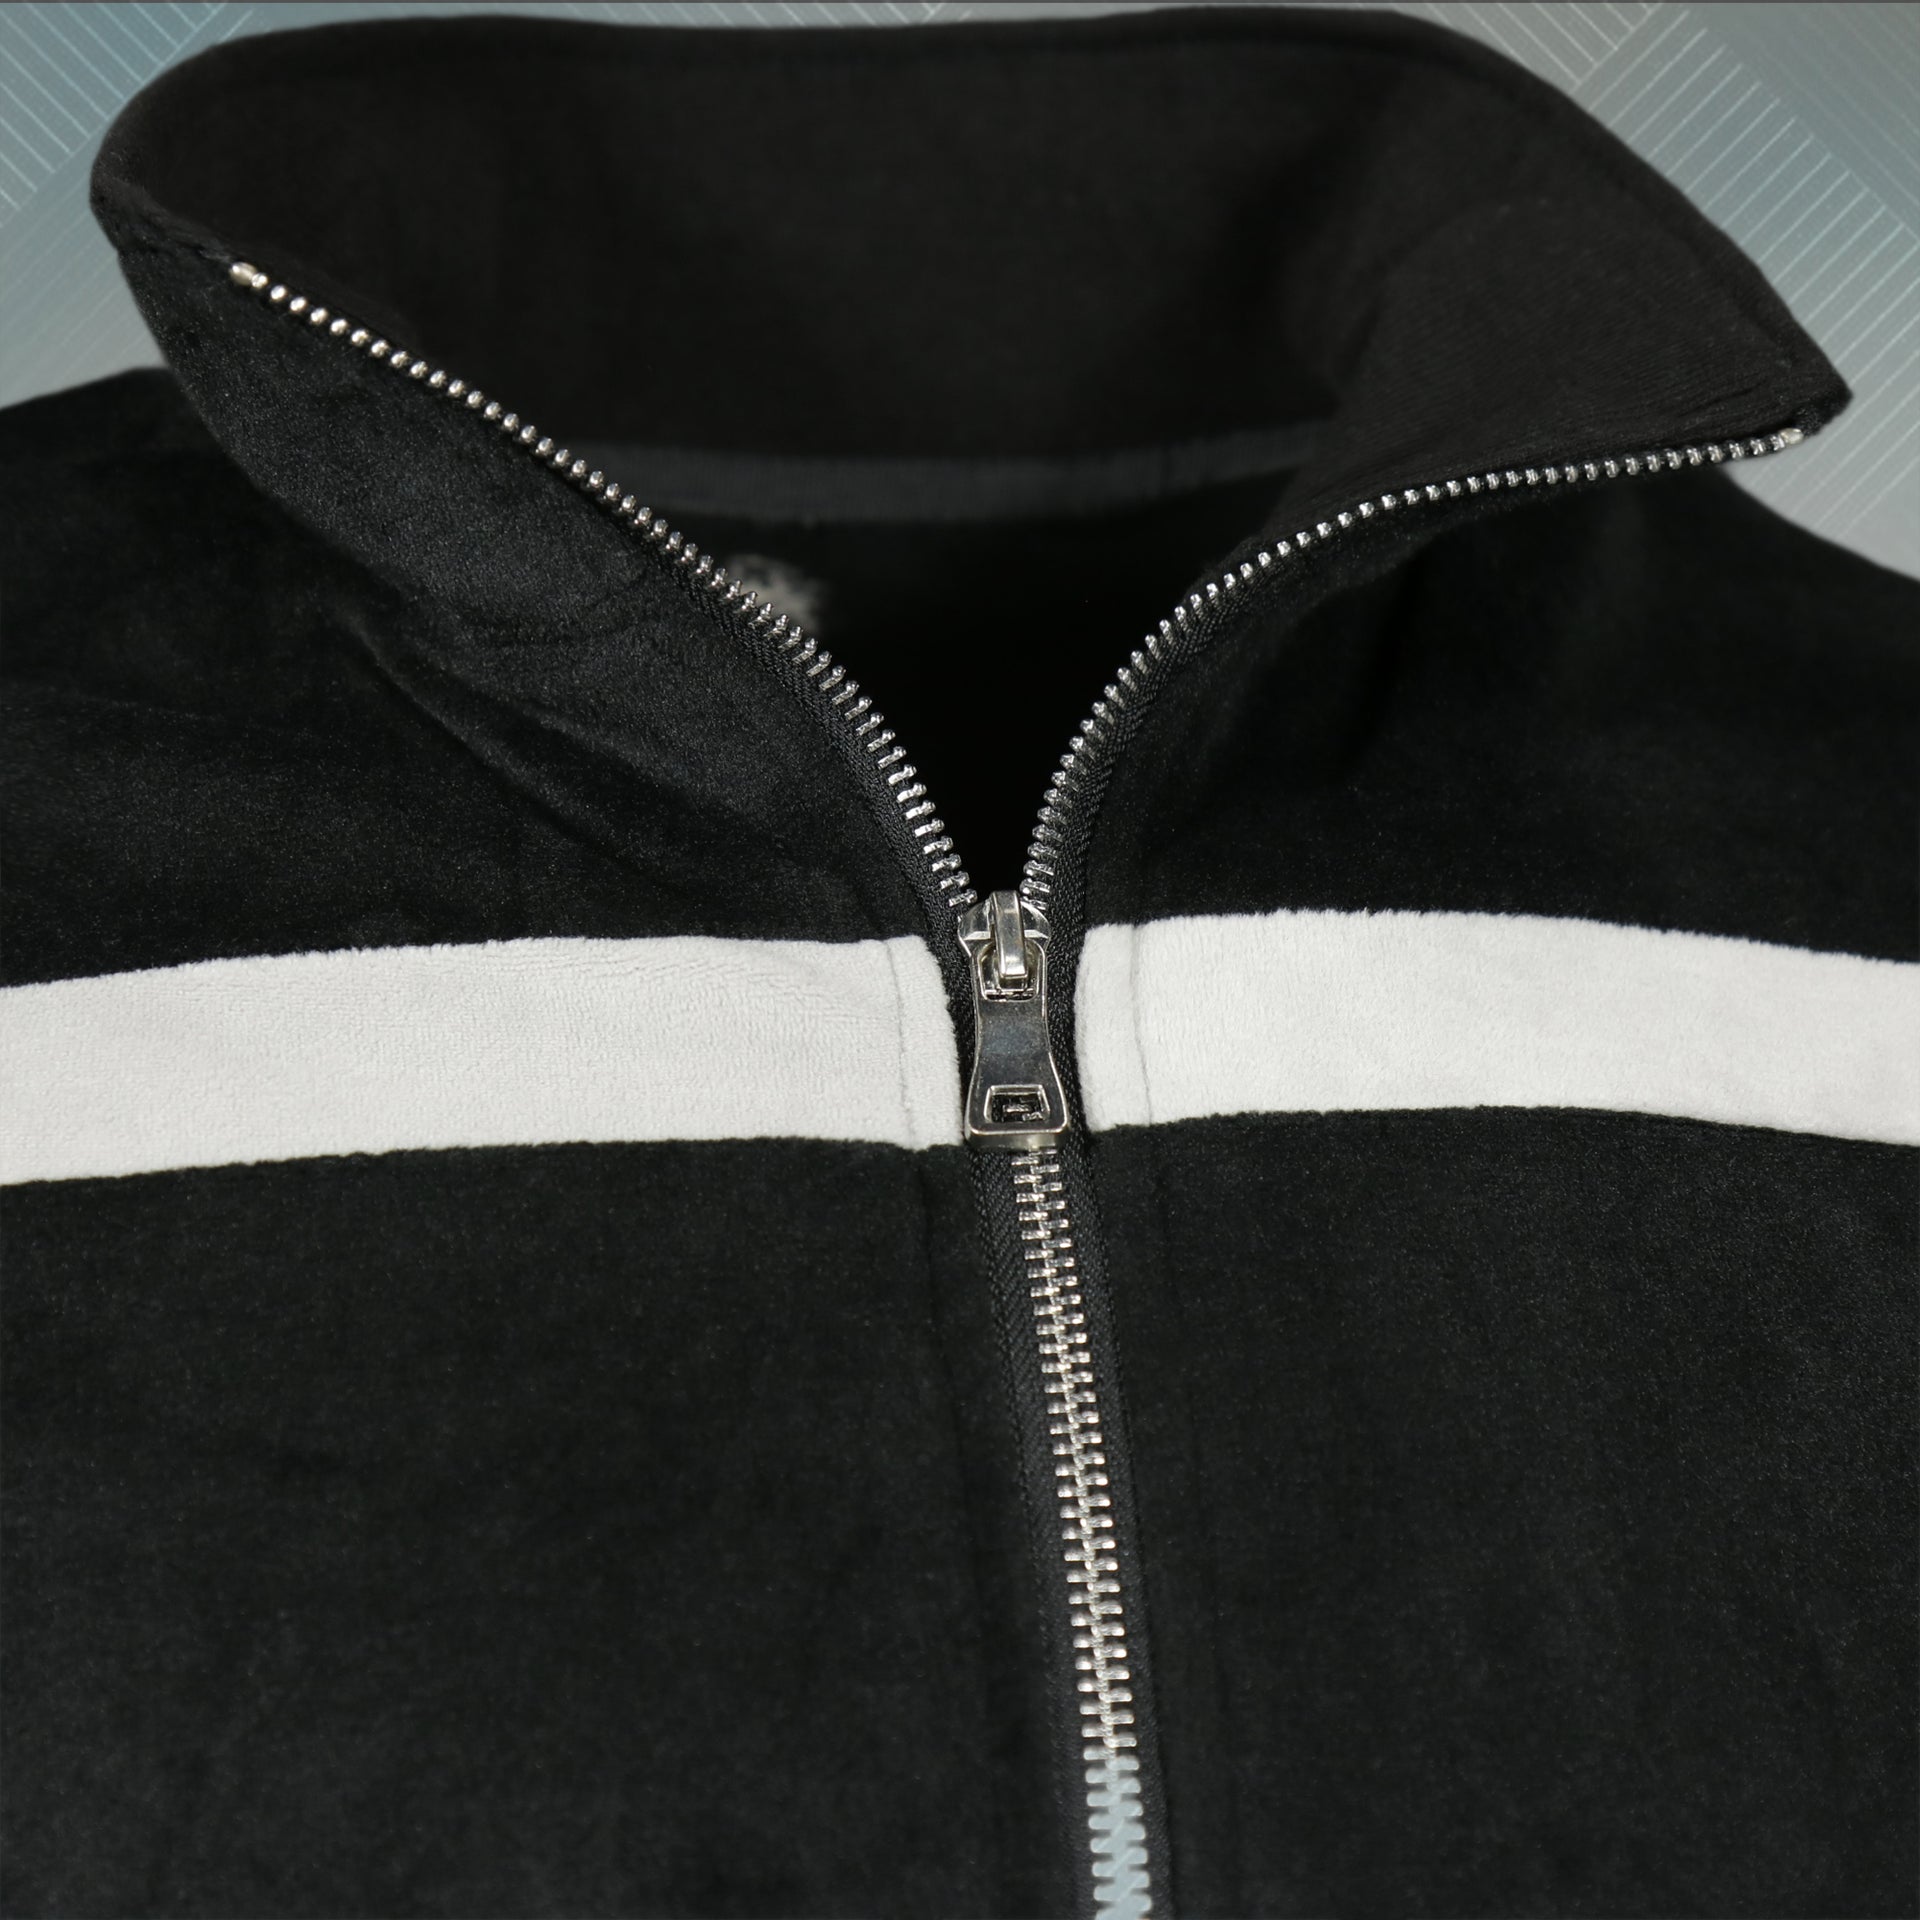 zipper on the Italian Colorway Inspired Italian Fashion Black Gray Stripe Snake and Bees Velour Track Jacket